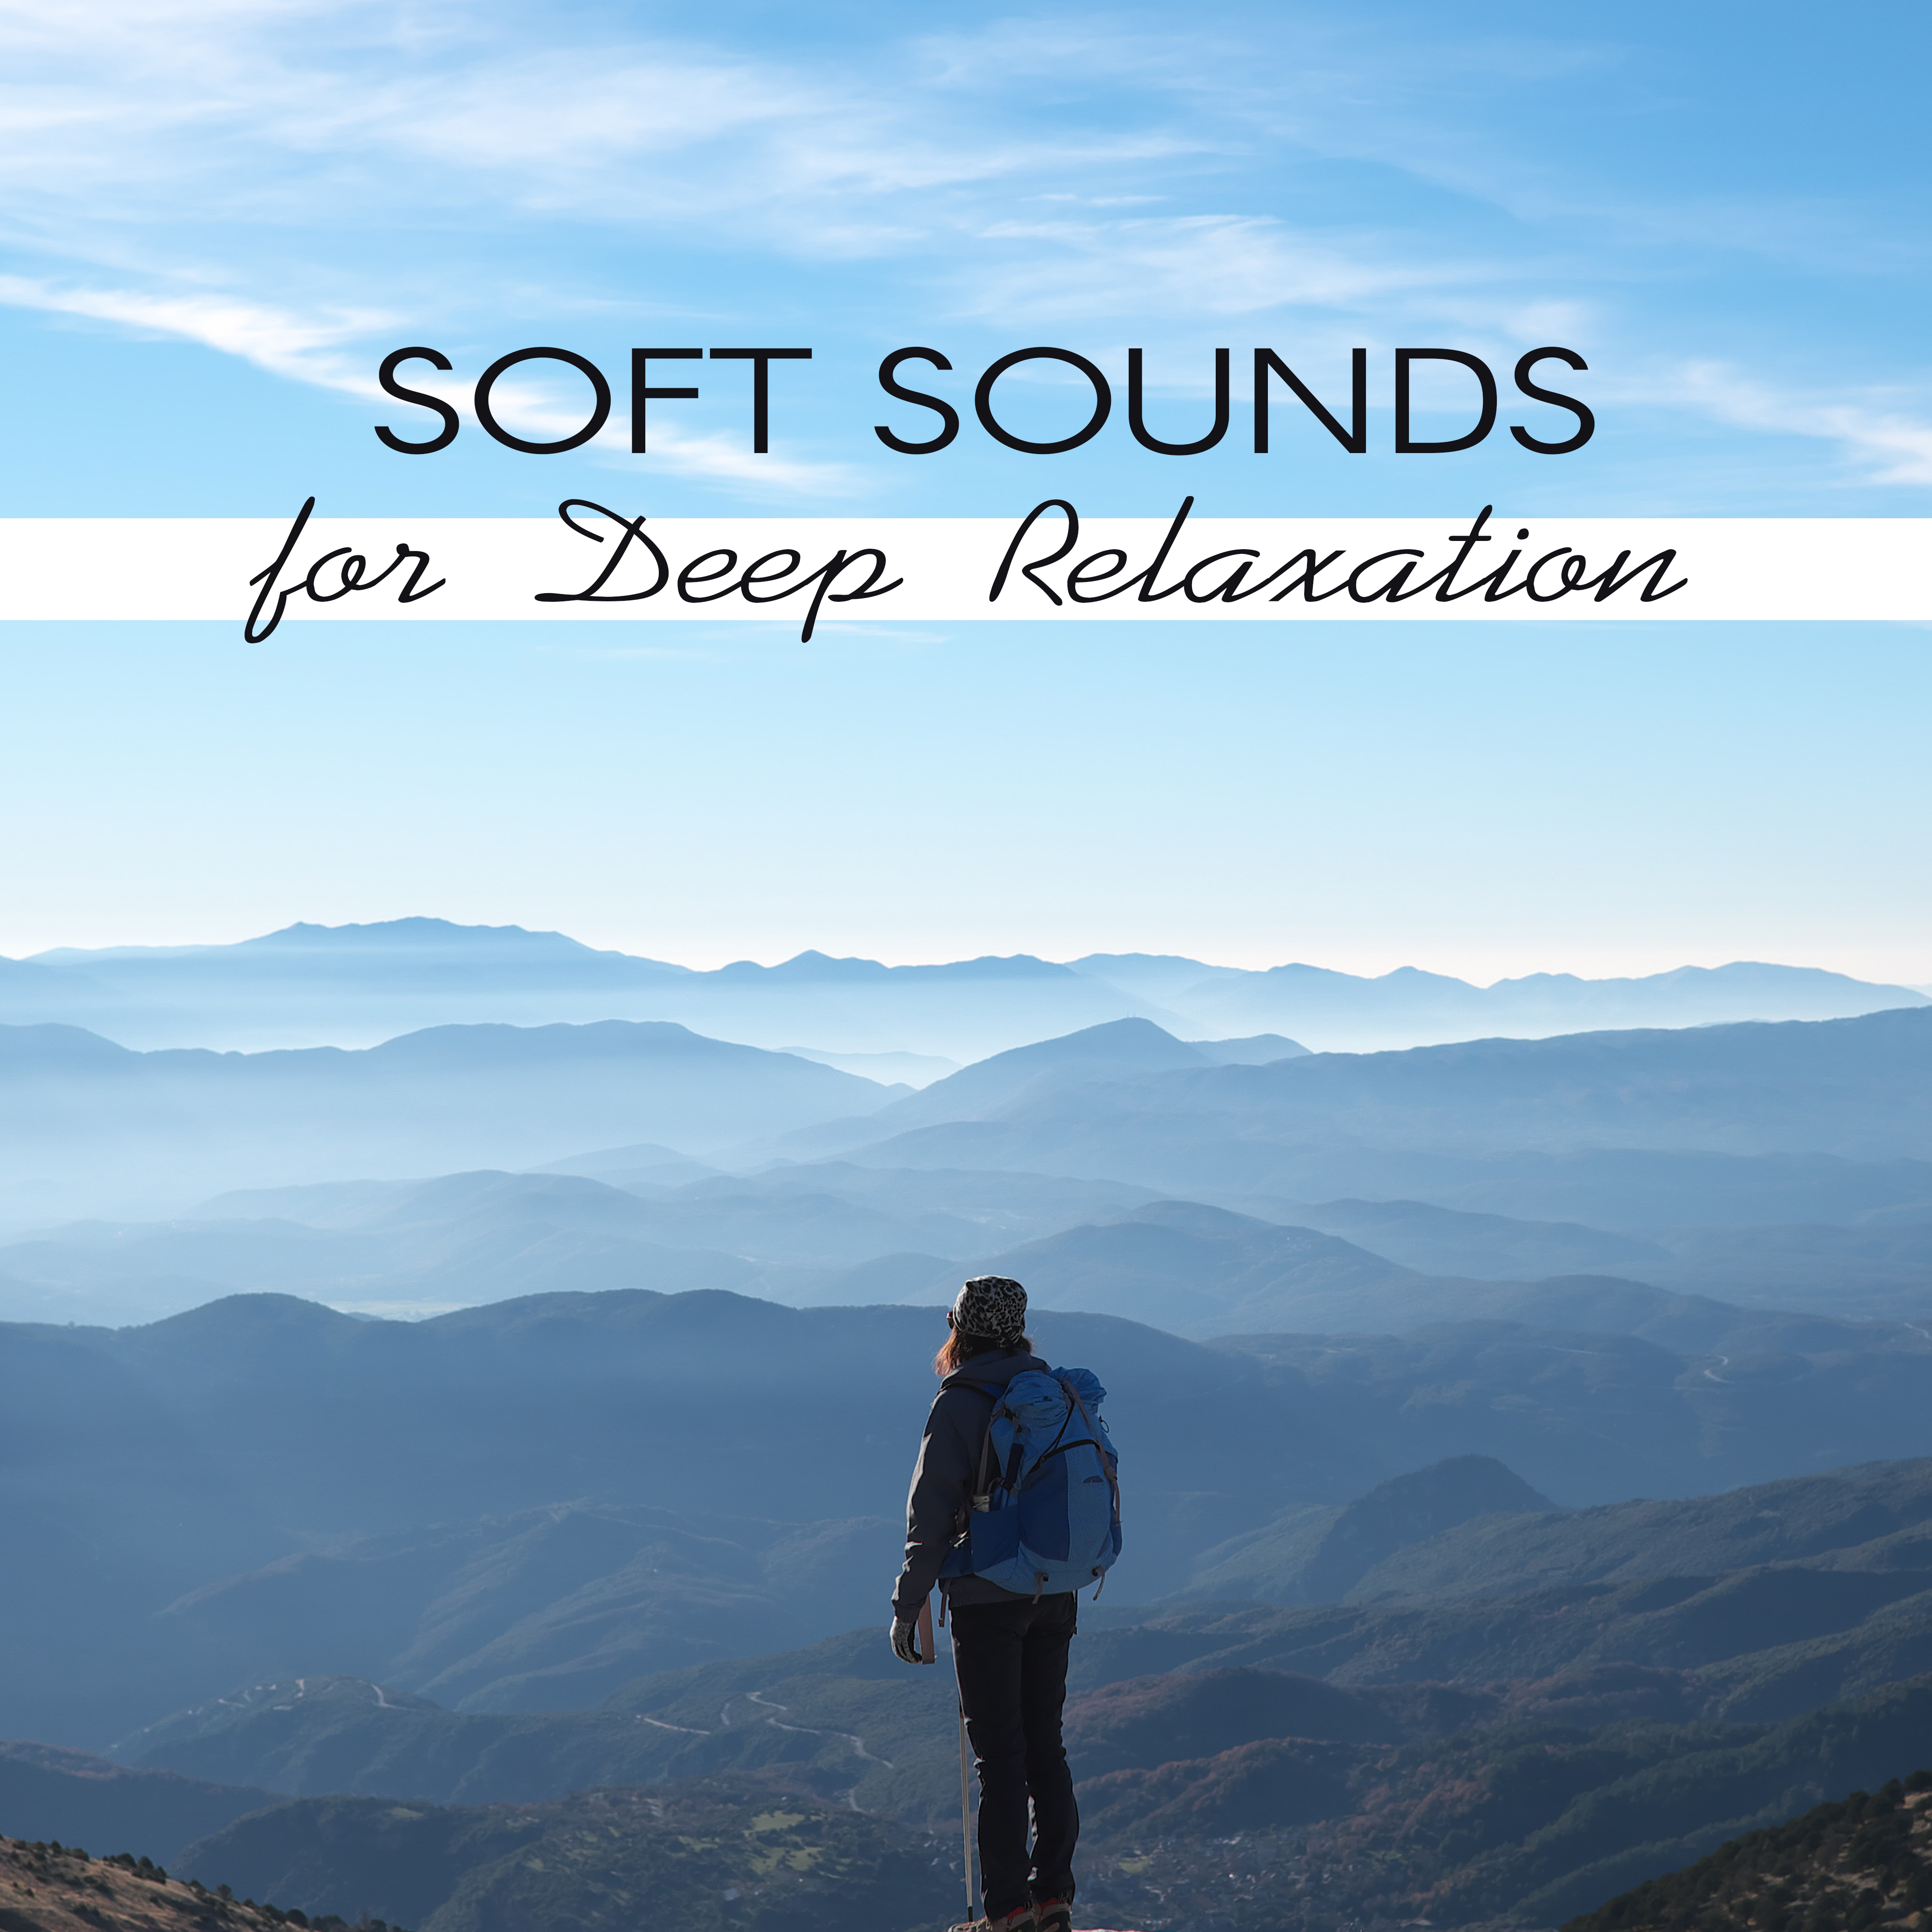 Soft Sounds for Deep Relaxation